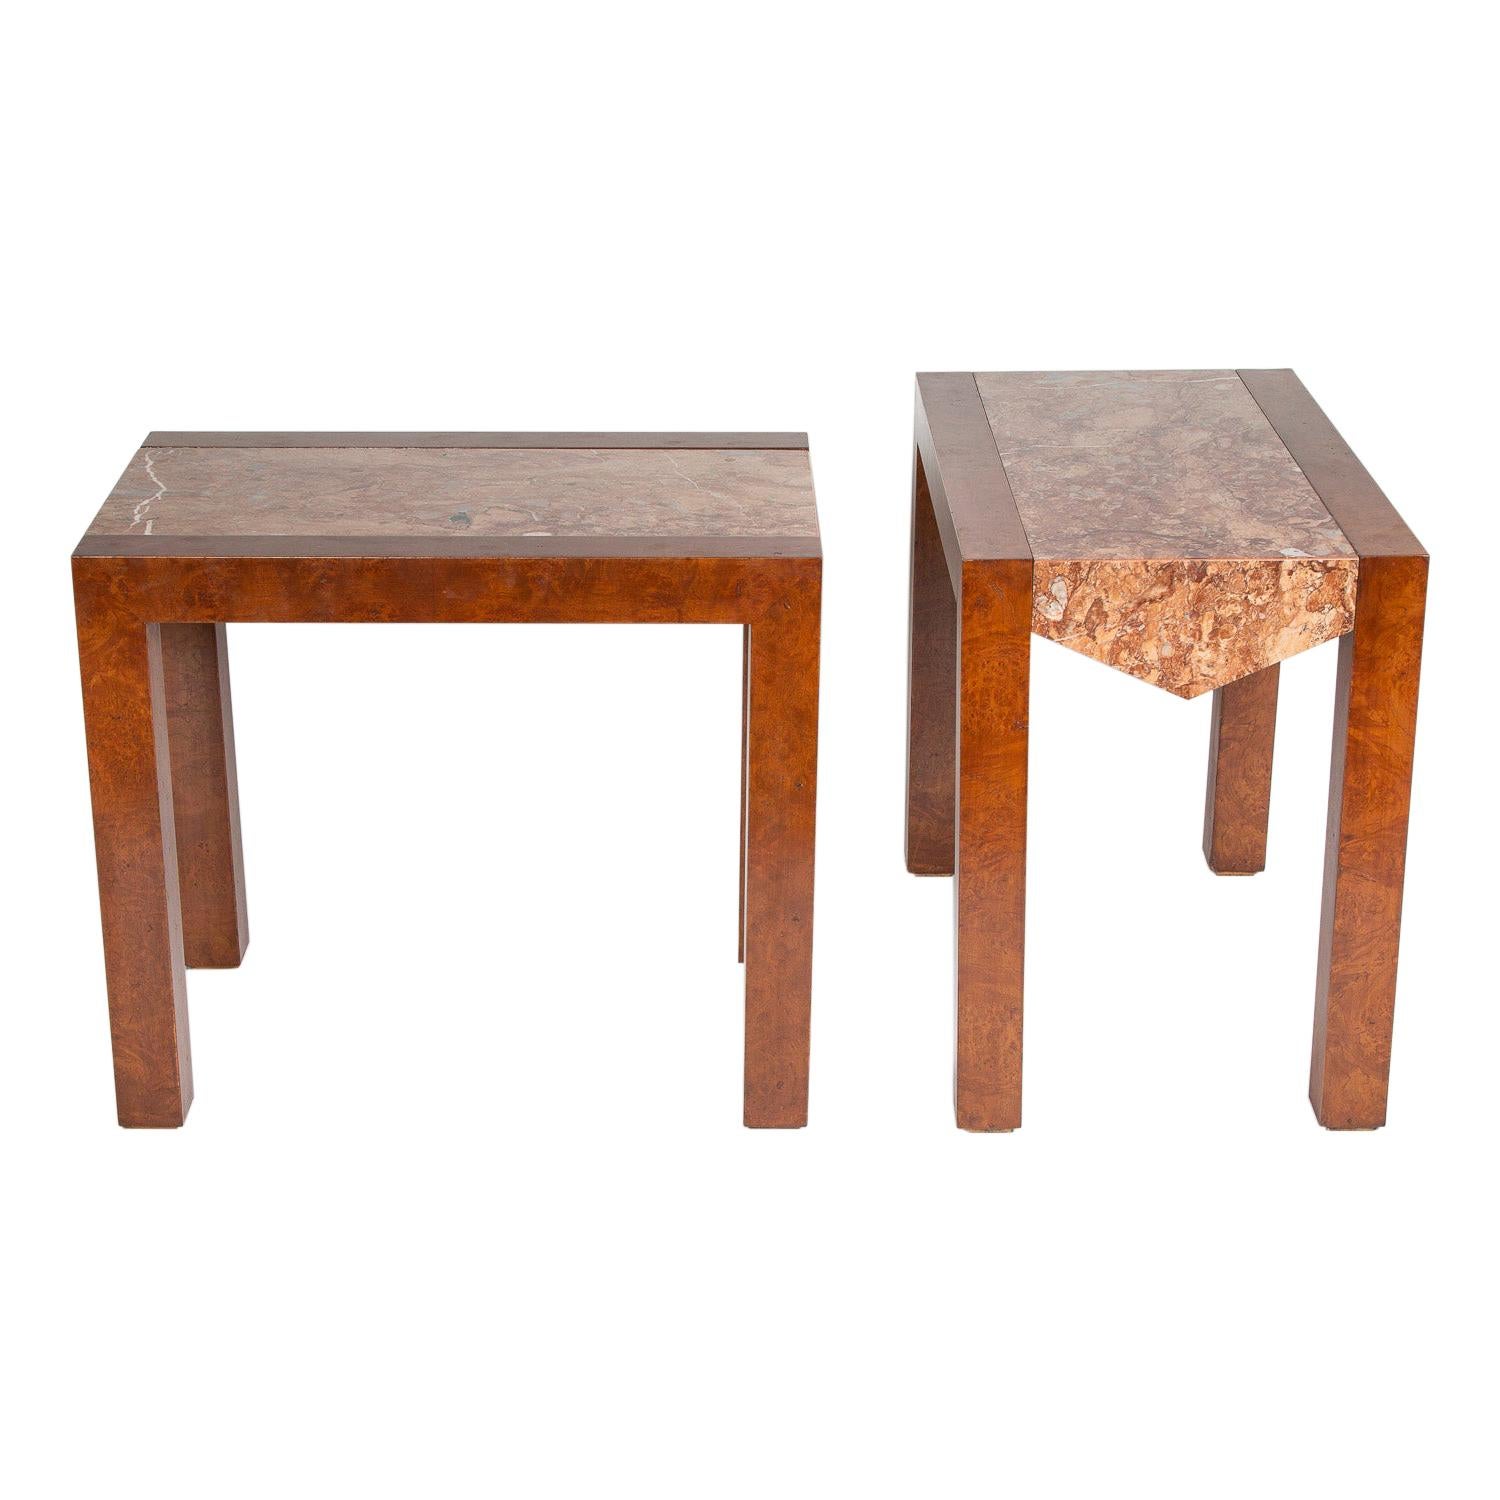 Pair of Amboyna Side Tables with Alicante Marble Tops